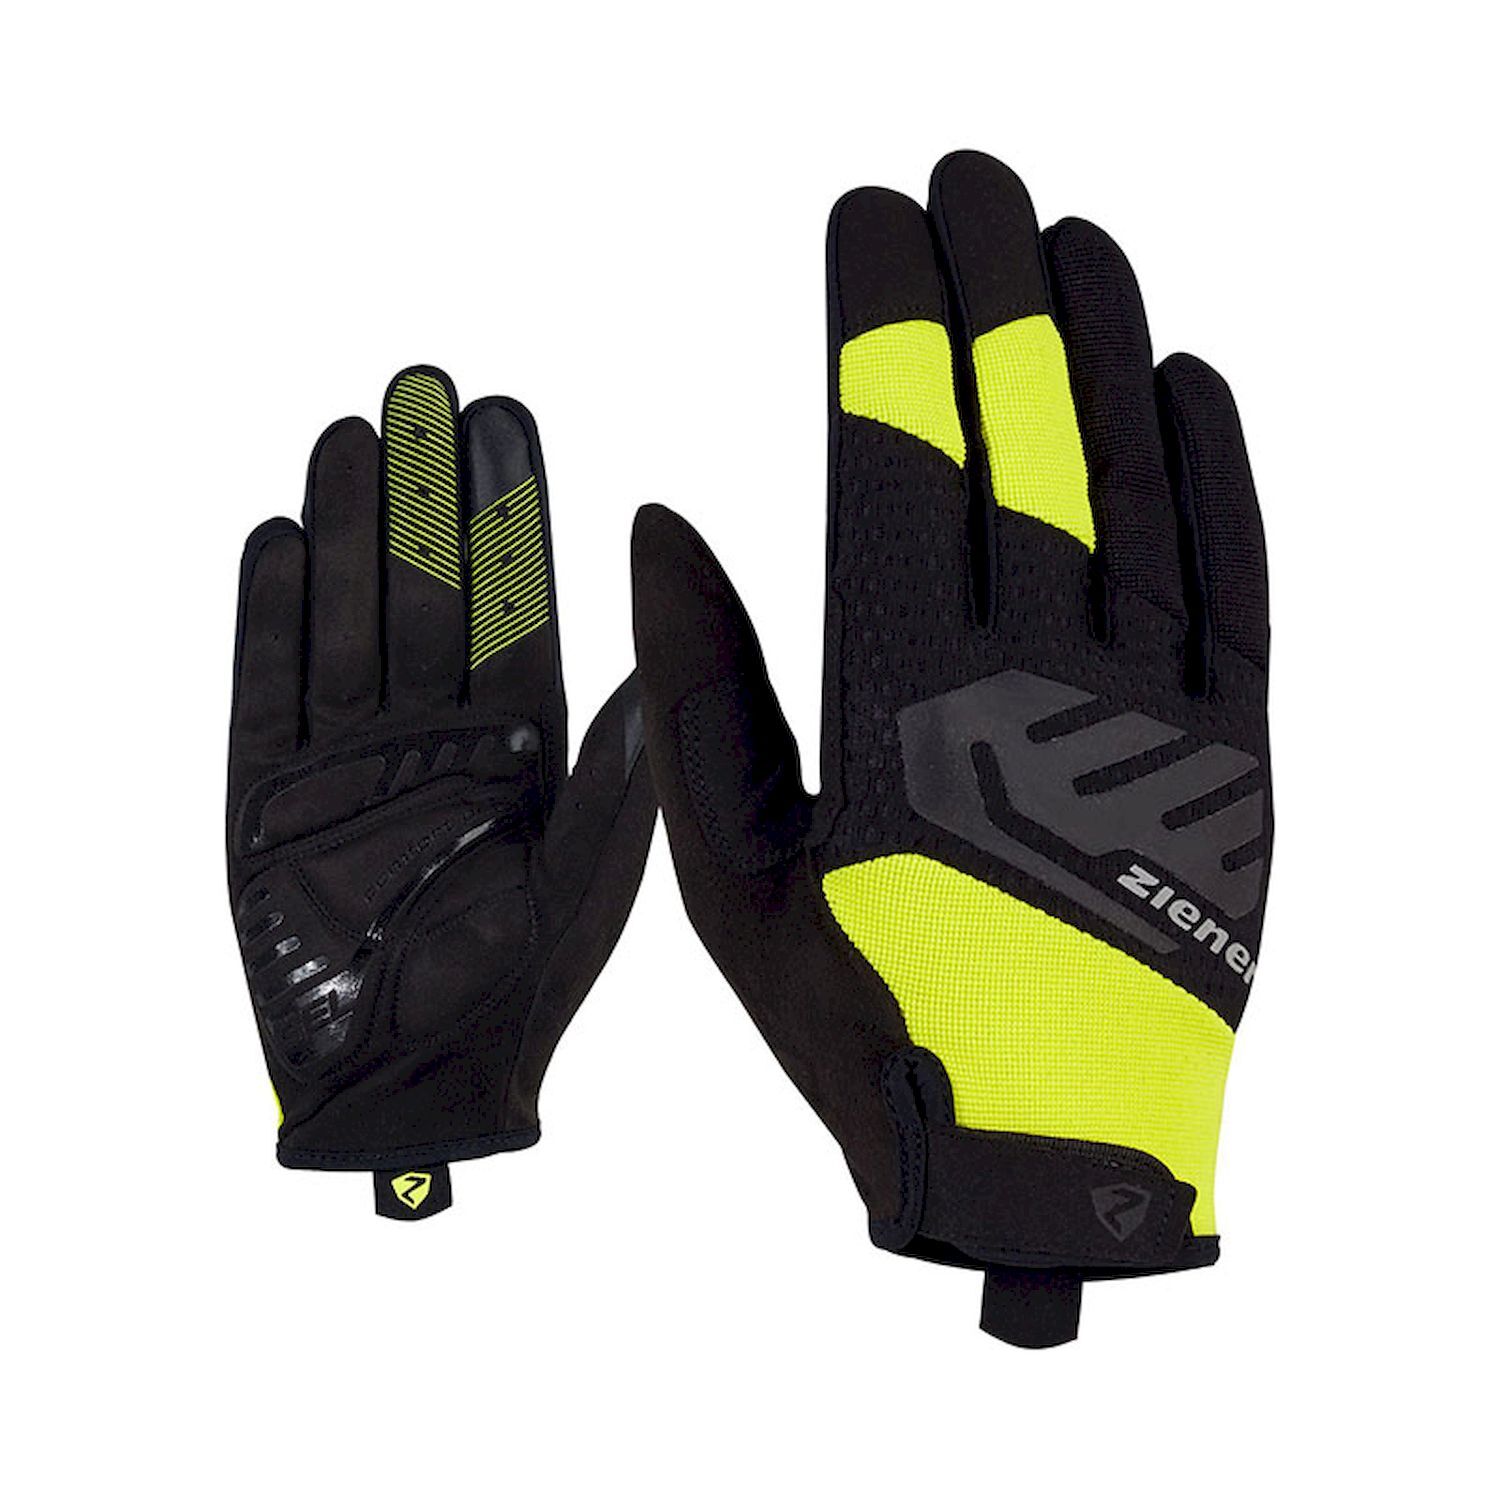 Ziener Ched Touch Long - Cycling gloves - Men's